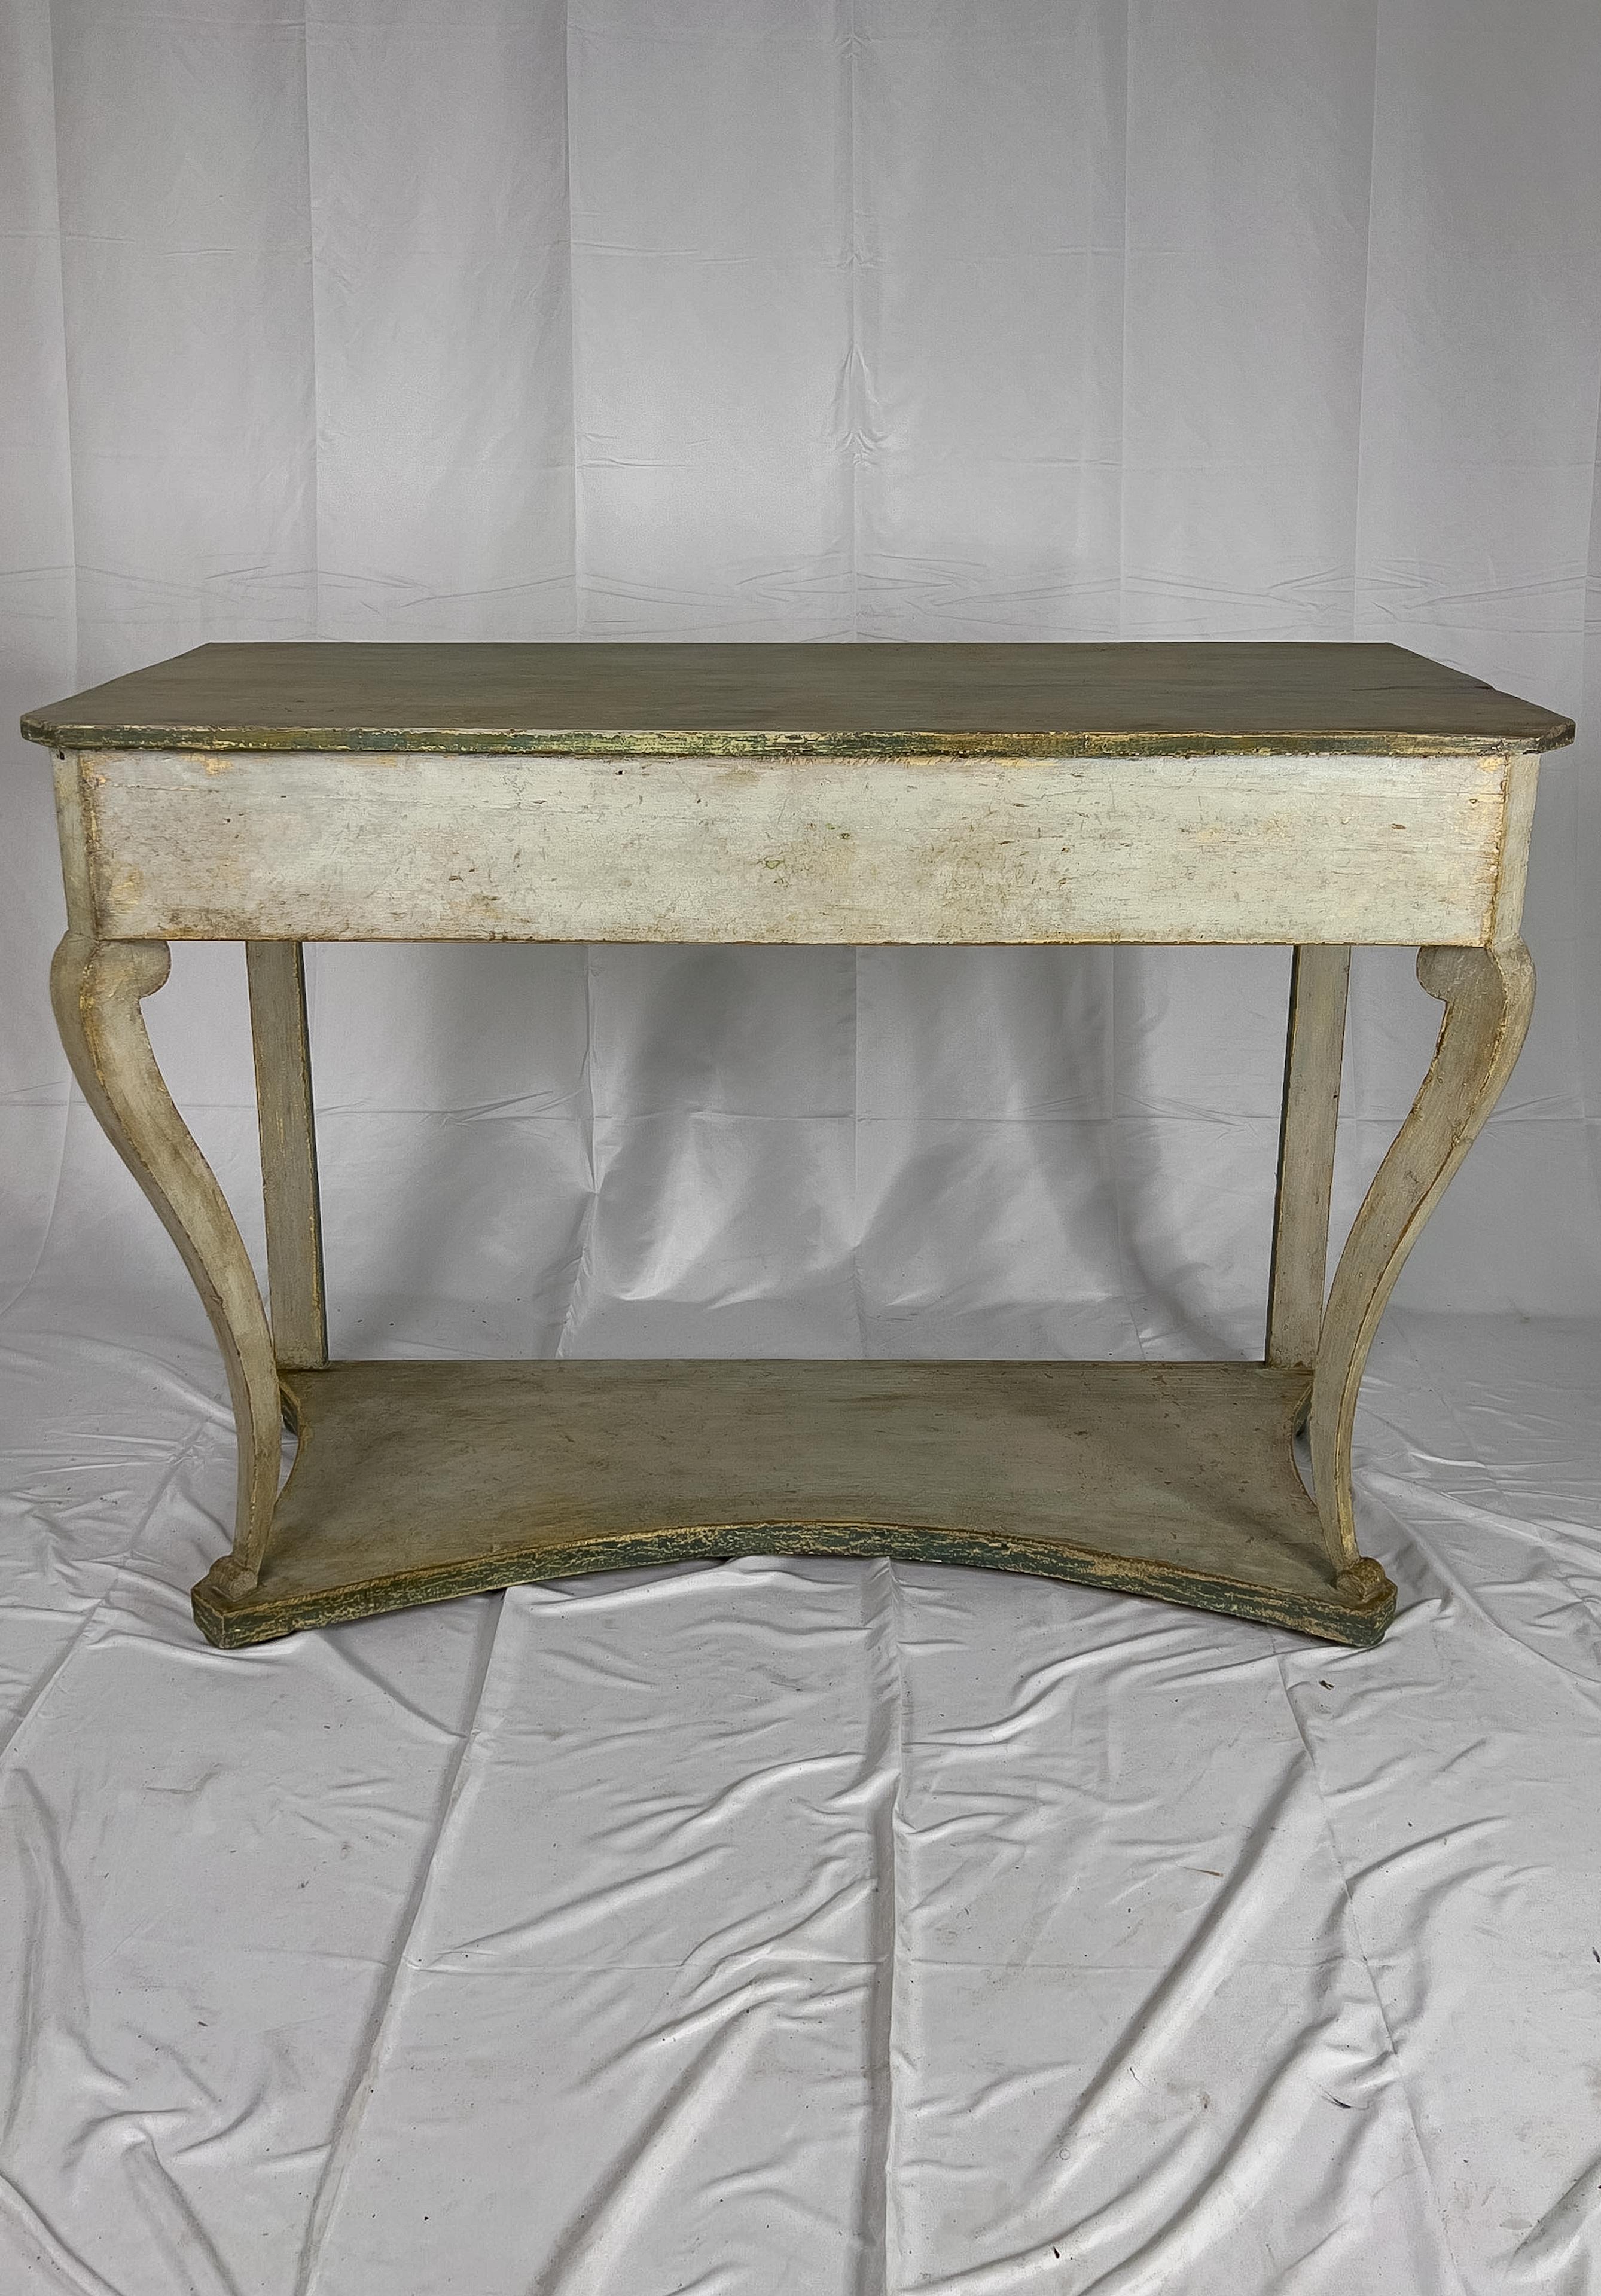 19th century Swedish painted console table supported by cabriole front legs and a base at the bottom. This piece was repainted and the top of the console is painted green while the body is in a light khaki tone. The bottom of the base and back legs